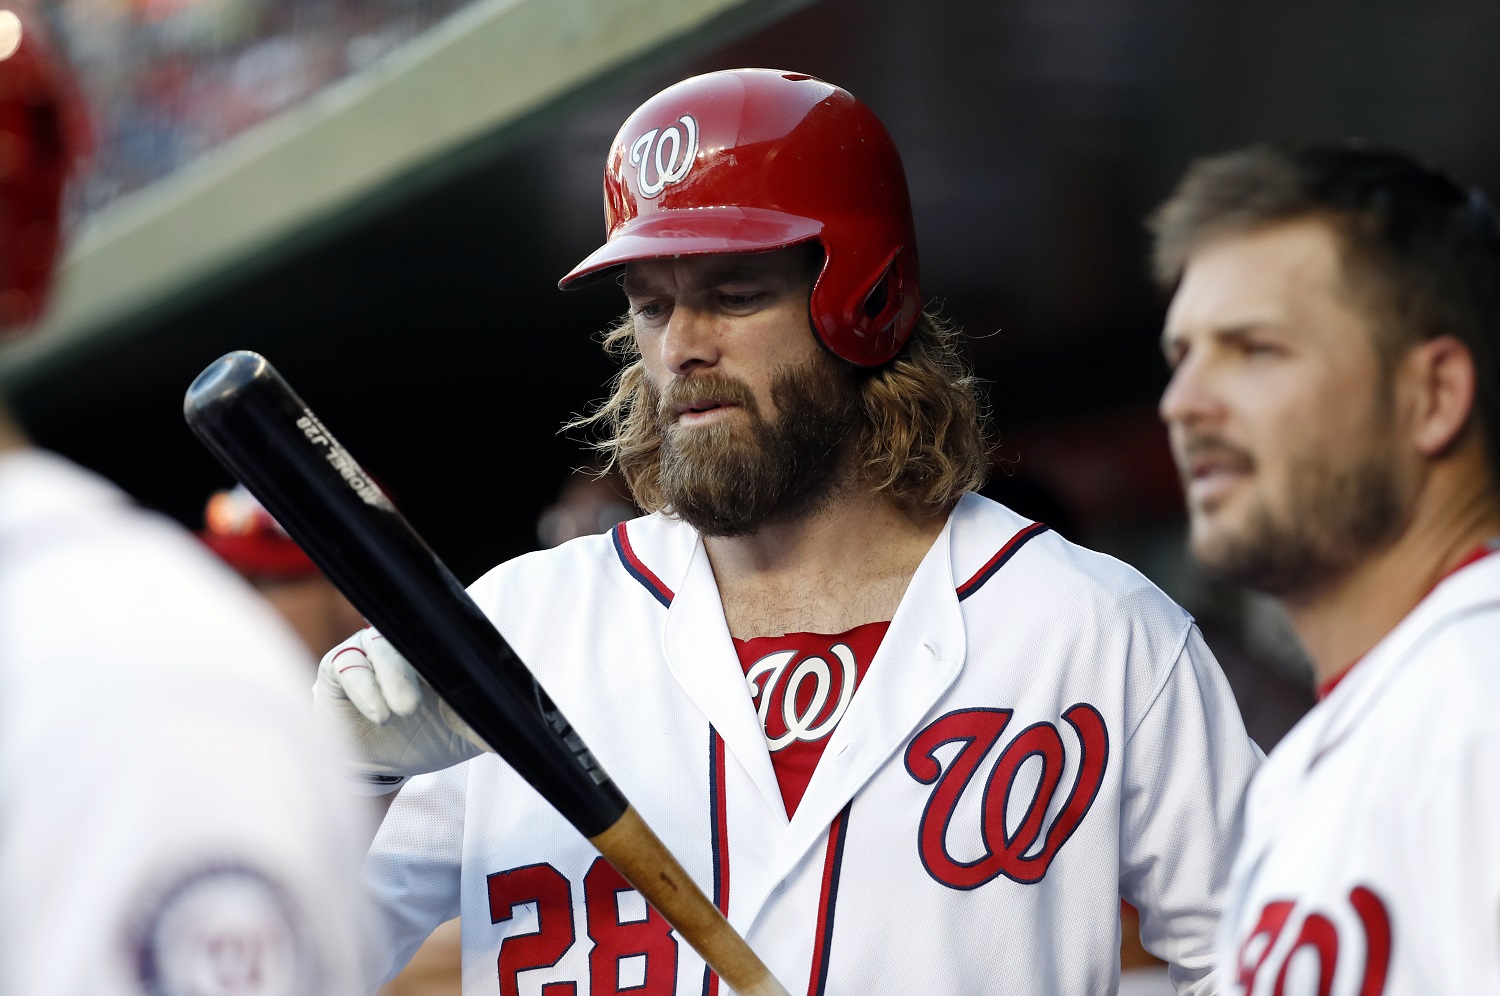 Washington Nationals left fielder Jayson Werth (28) checks his bat in the dugout during a baseball game against the New York Mets at Nationals Park, Wednesday, Sept. 14, 2016, in Washington. The Nationals won 1-0. (AP Photo/Alex Brandon)